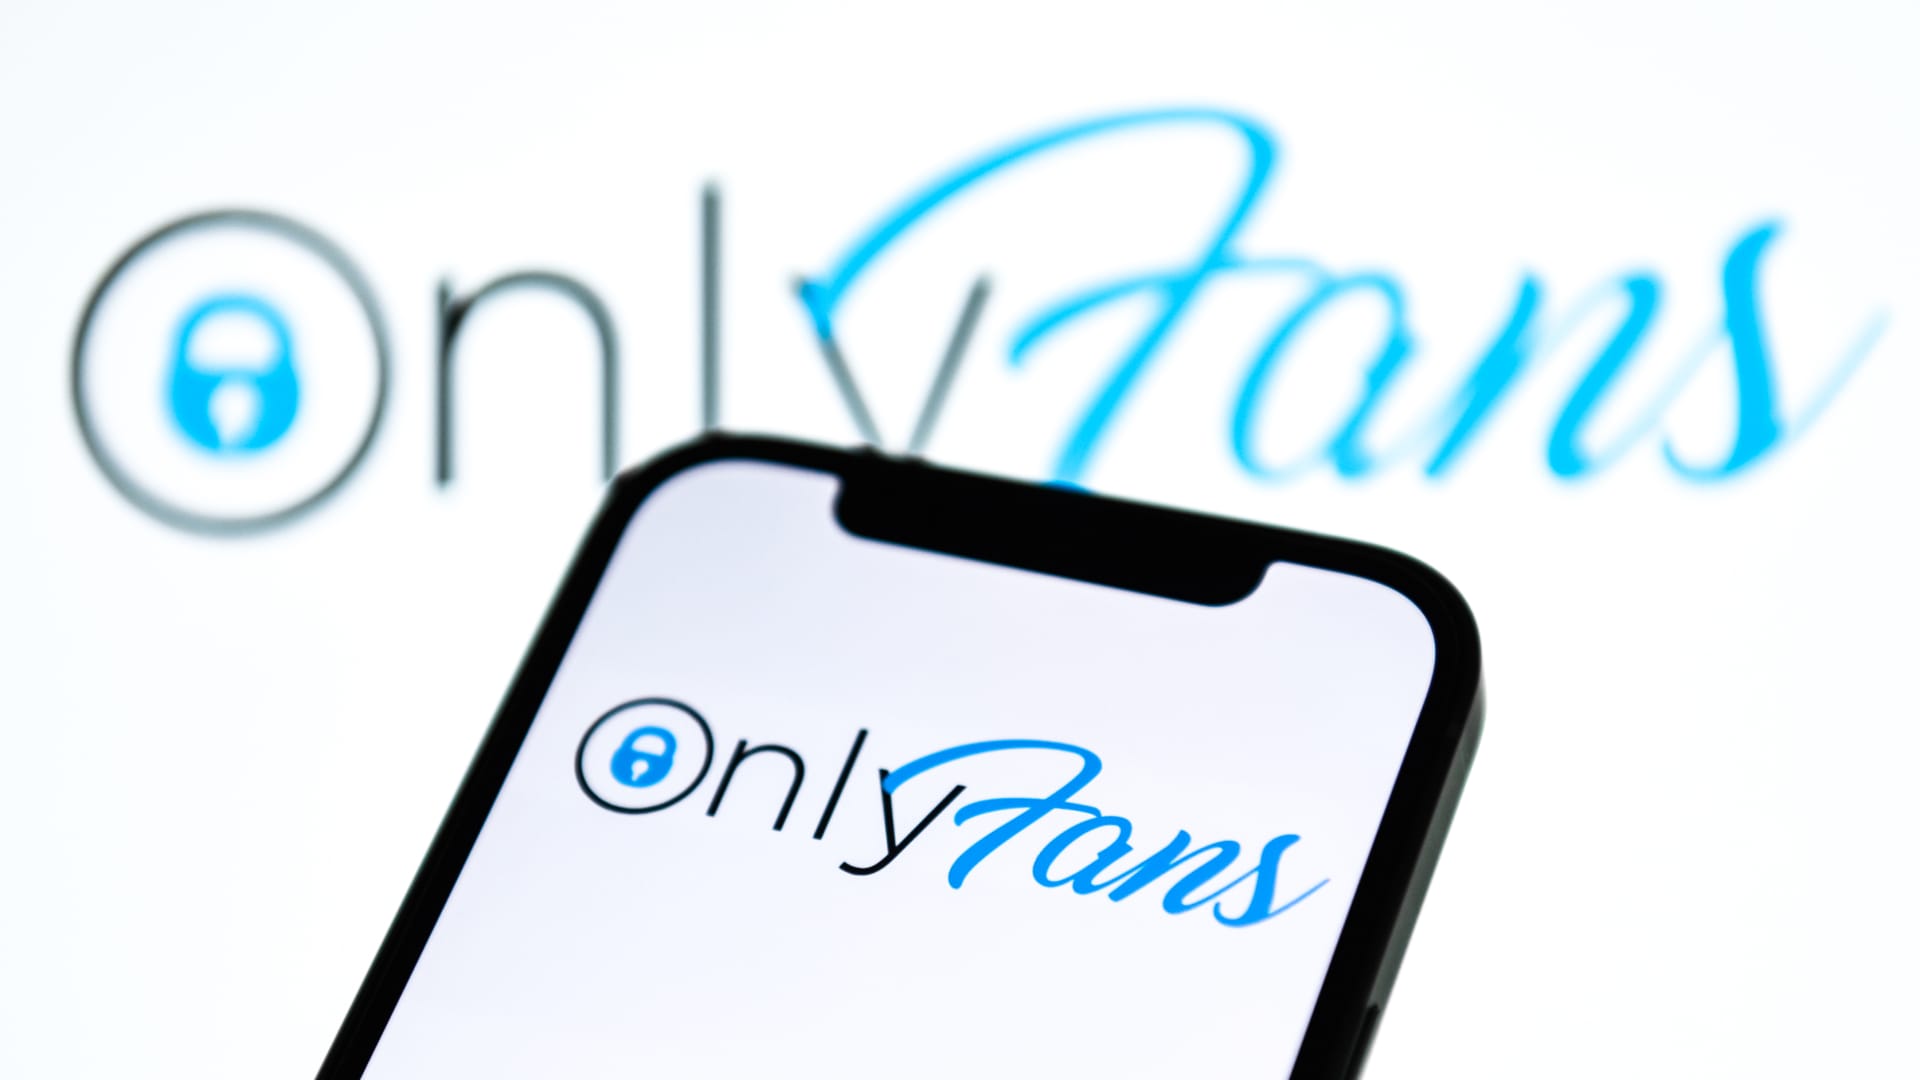 mejores chicas onlyfans